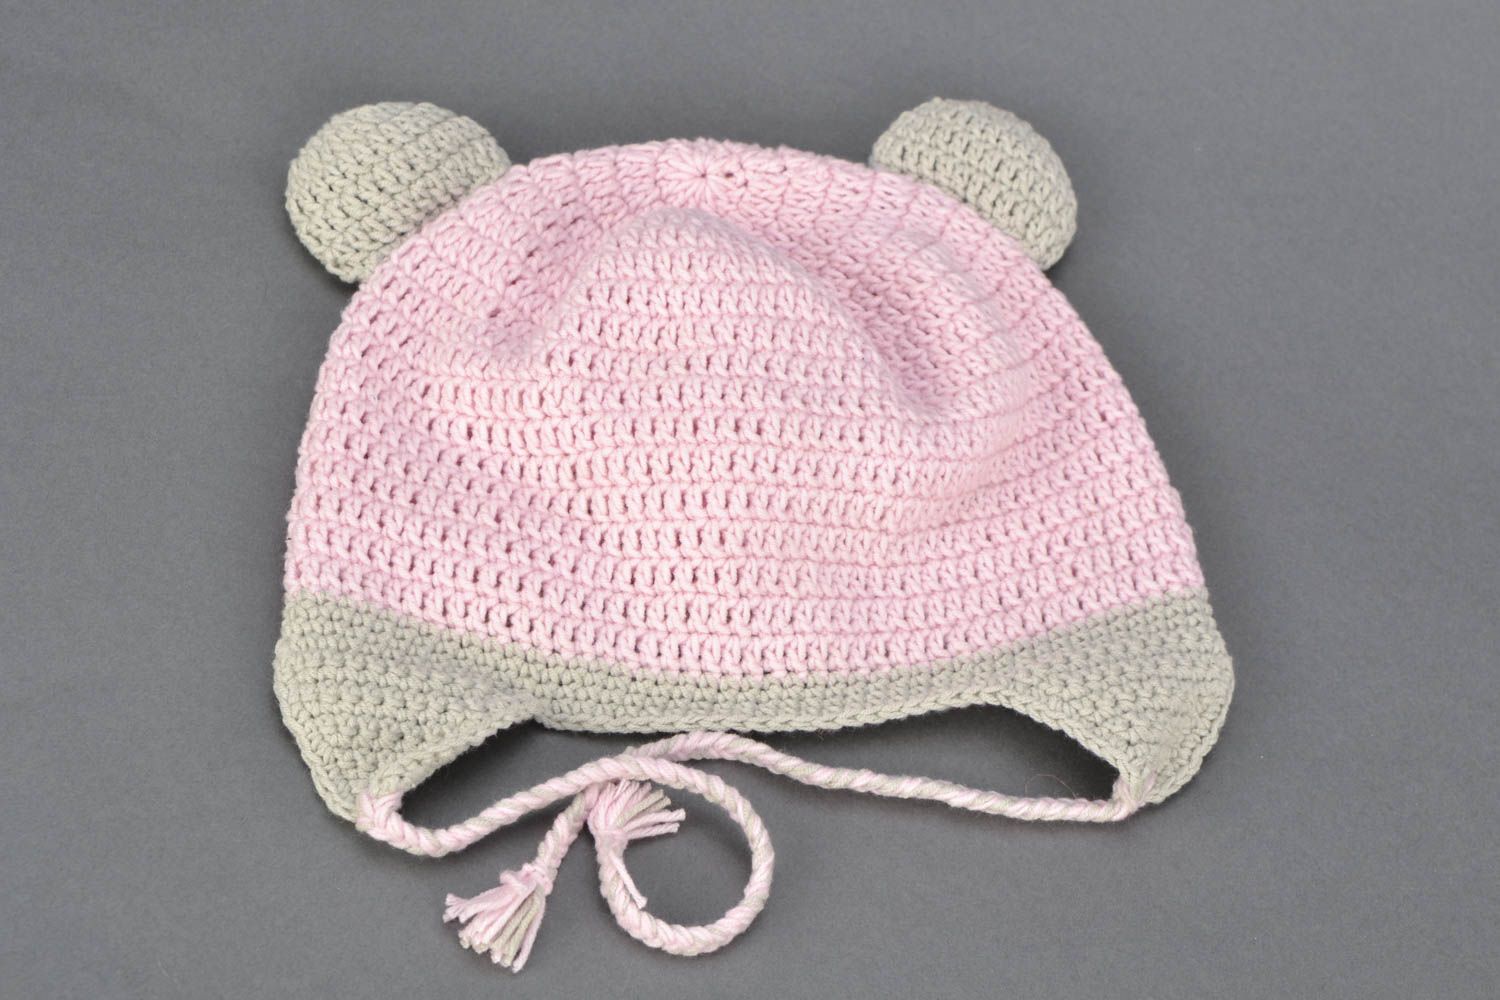 Hand crocheted pink hat photo 4